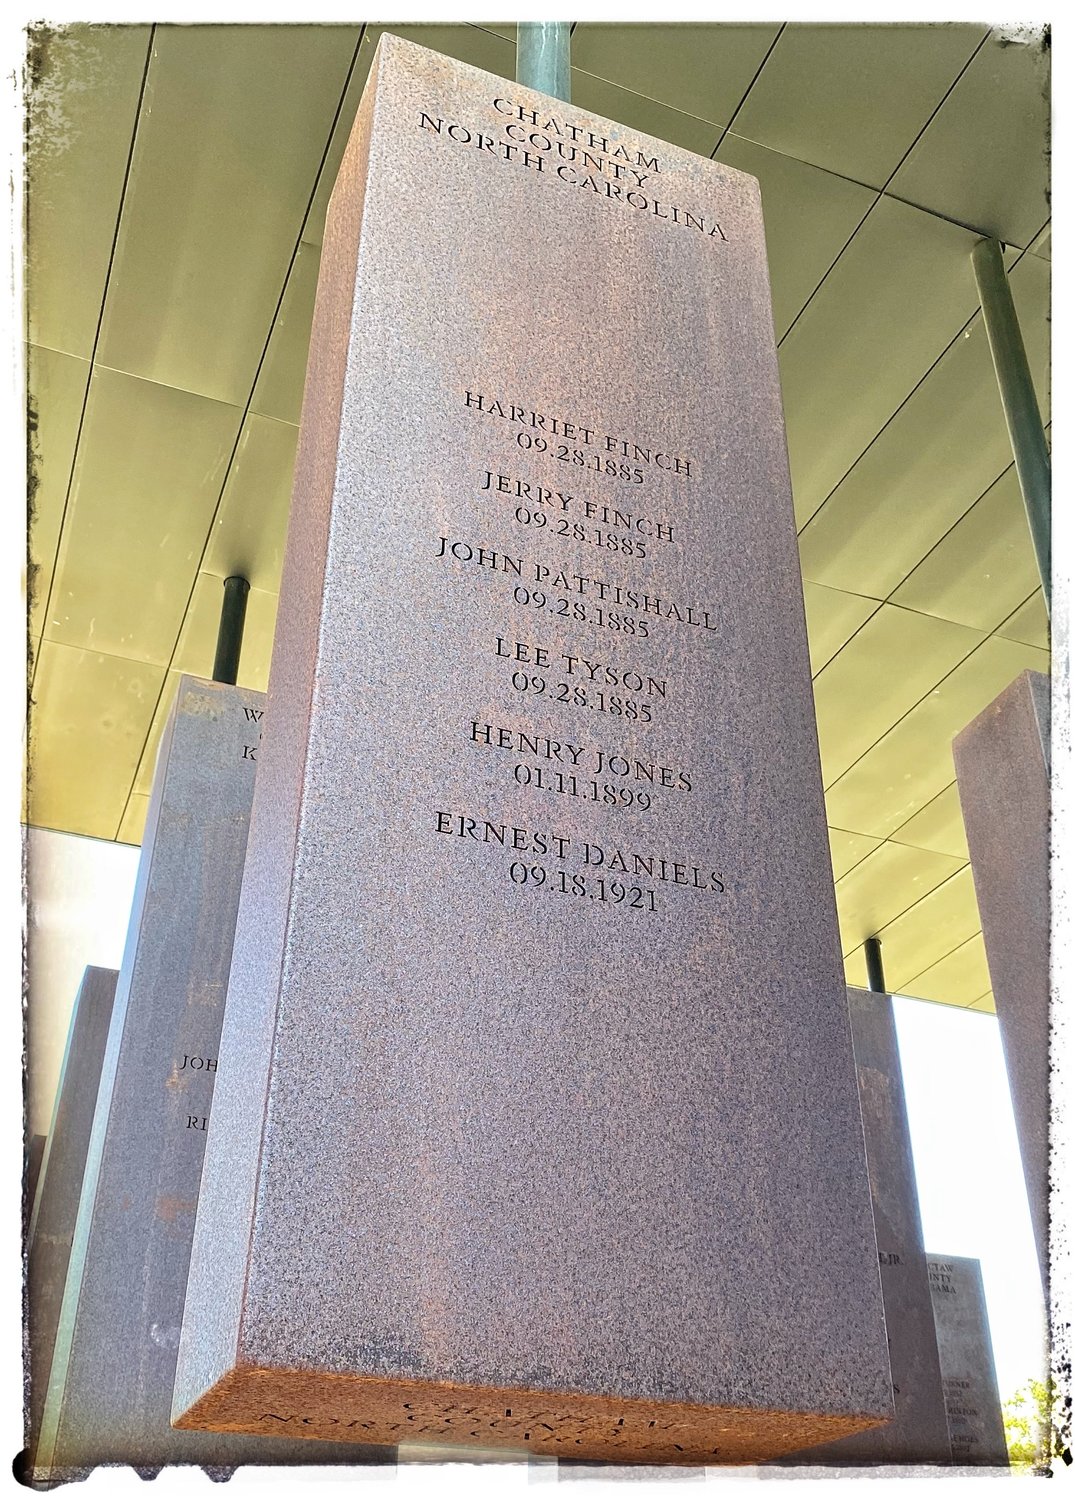 There are more than 800 six-foot tall corten steel monuments — one for each location in the U.S. where a racial terror lynching occured — at the EJI memorial. (Chatham's last victim, Eugene Daniel, was mistakenly identified as 'Ernest Daniels' in some press accounts after his 1921 lynching; the EJI plans to correct the spelling of his name.)